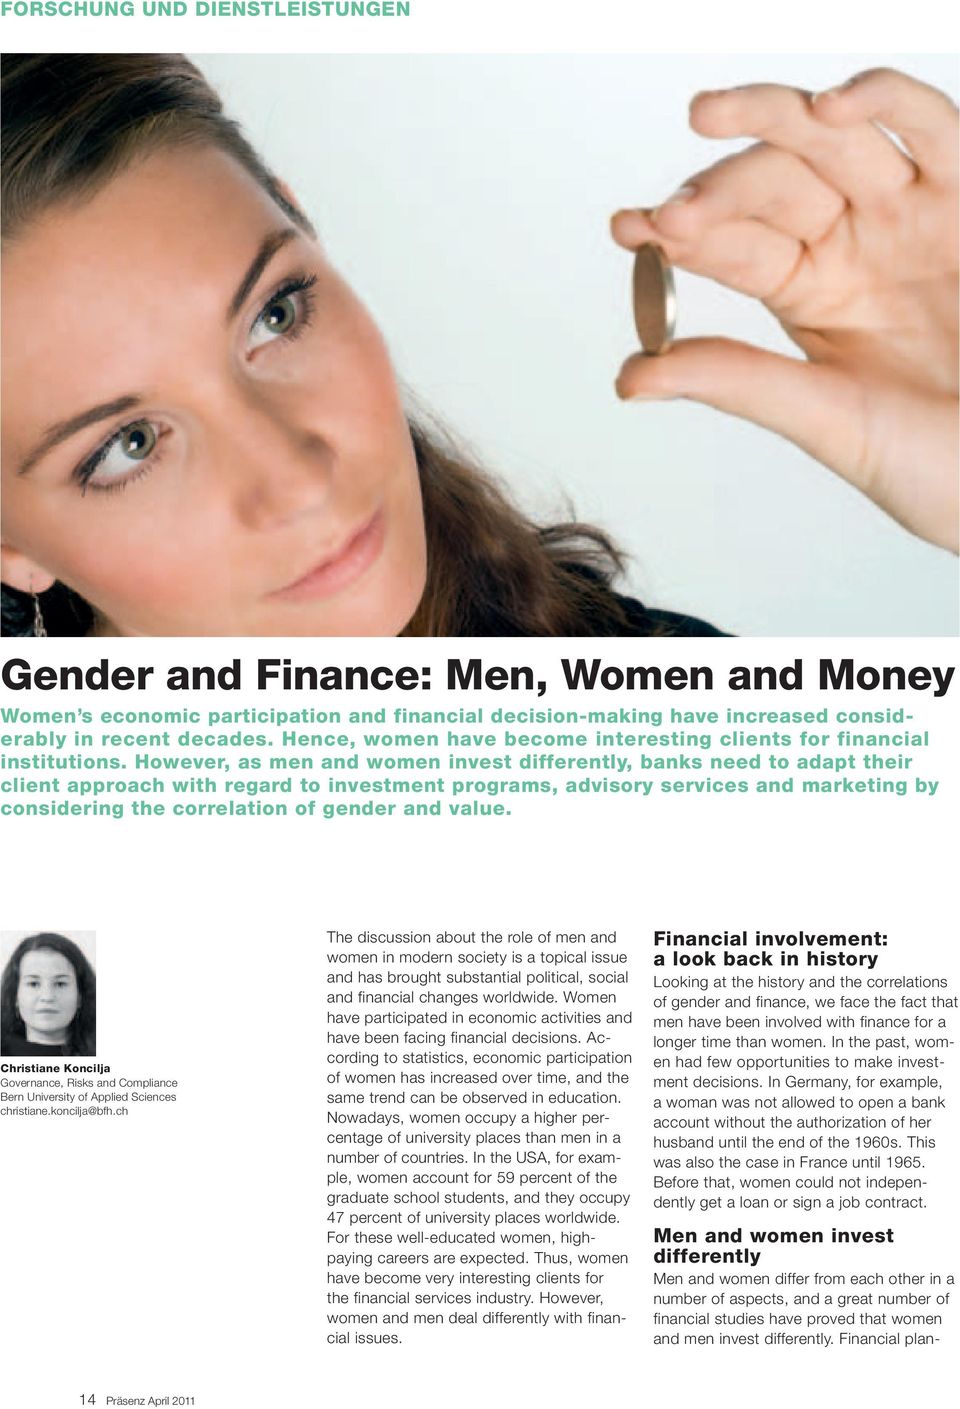 However, as men and women invest differently, banks need to adapt their client approach with regard to investment programs, advisory services and marketing by considering the correlation of gender